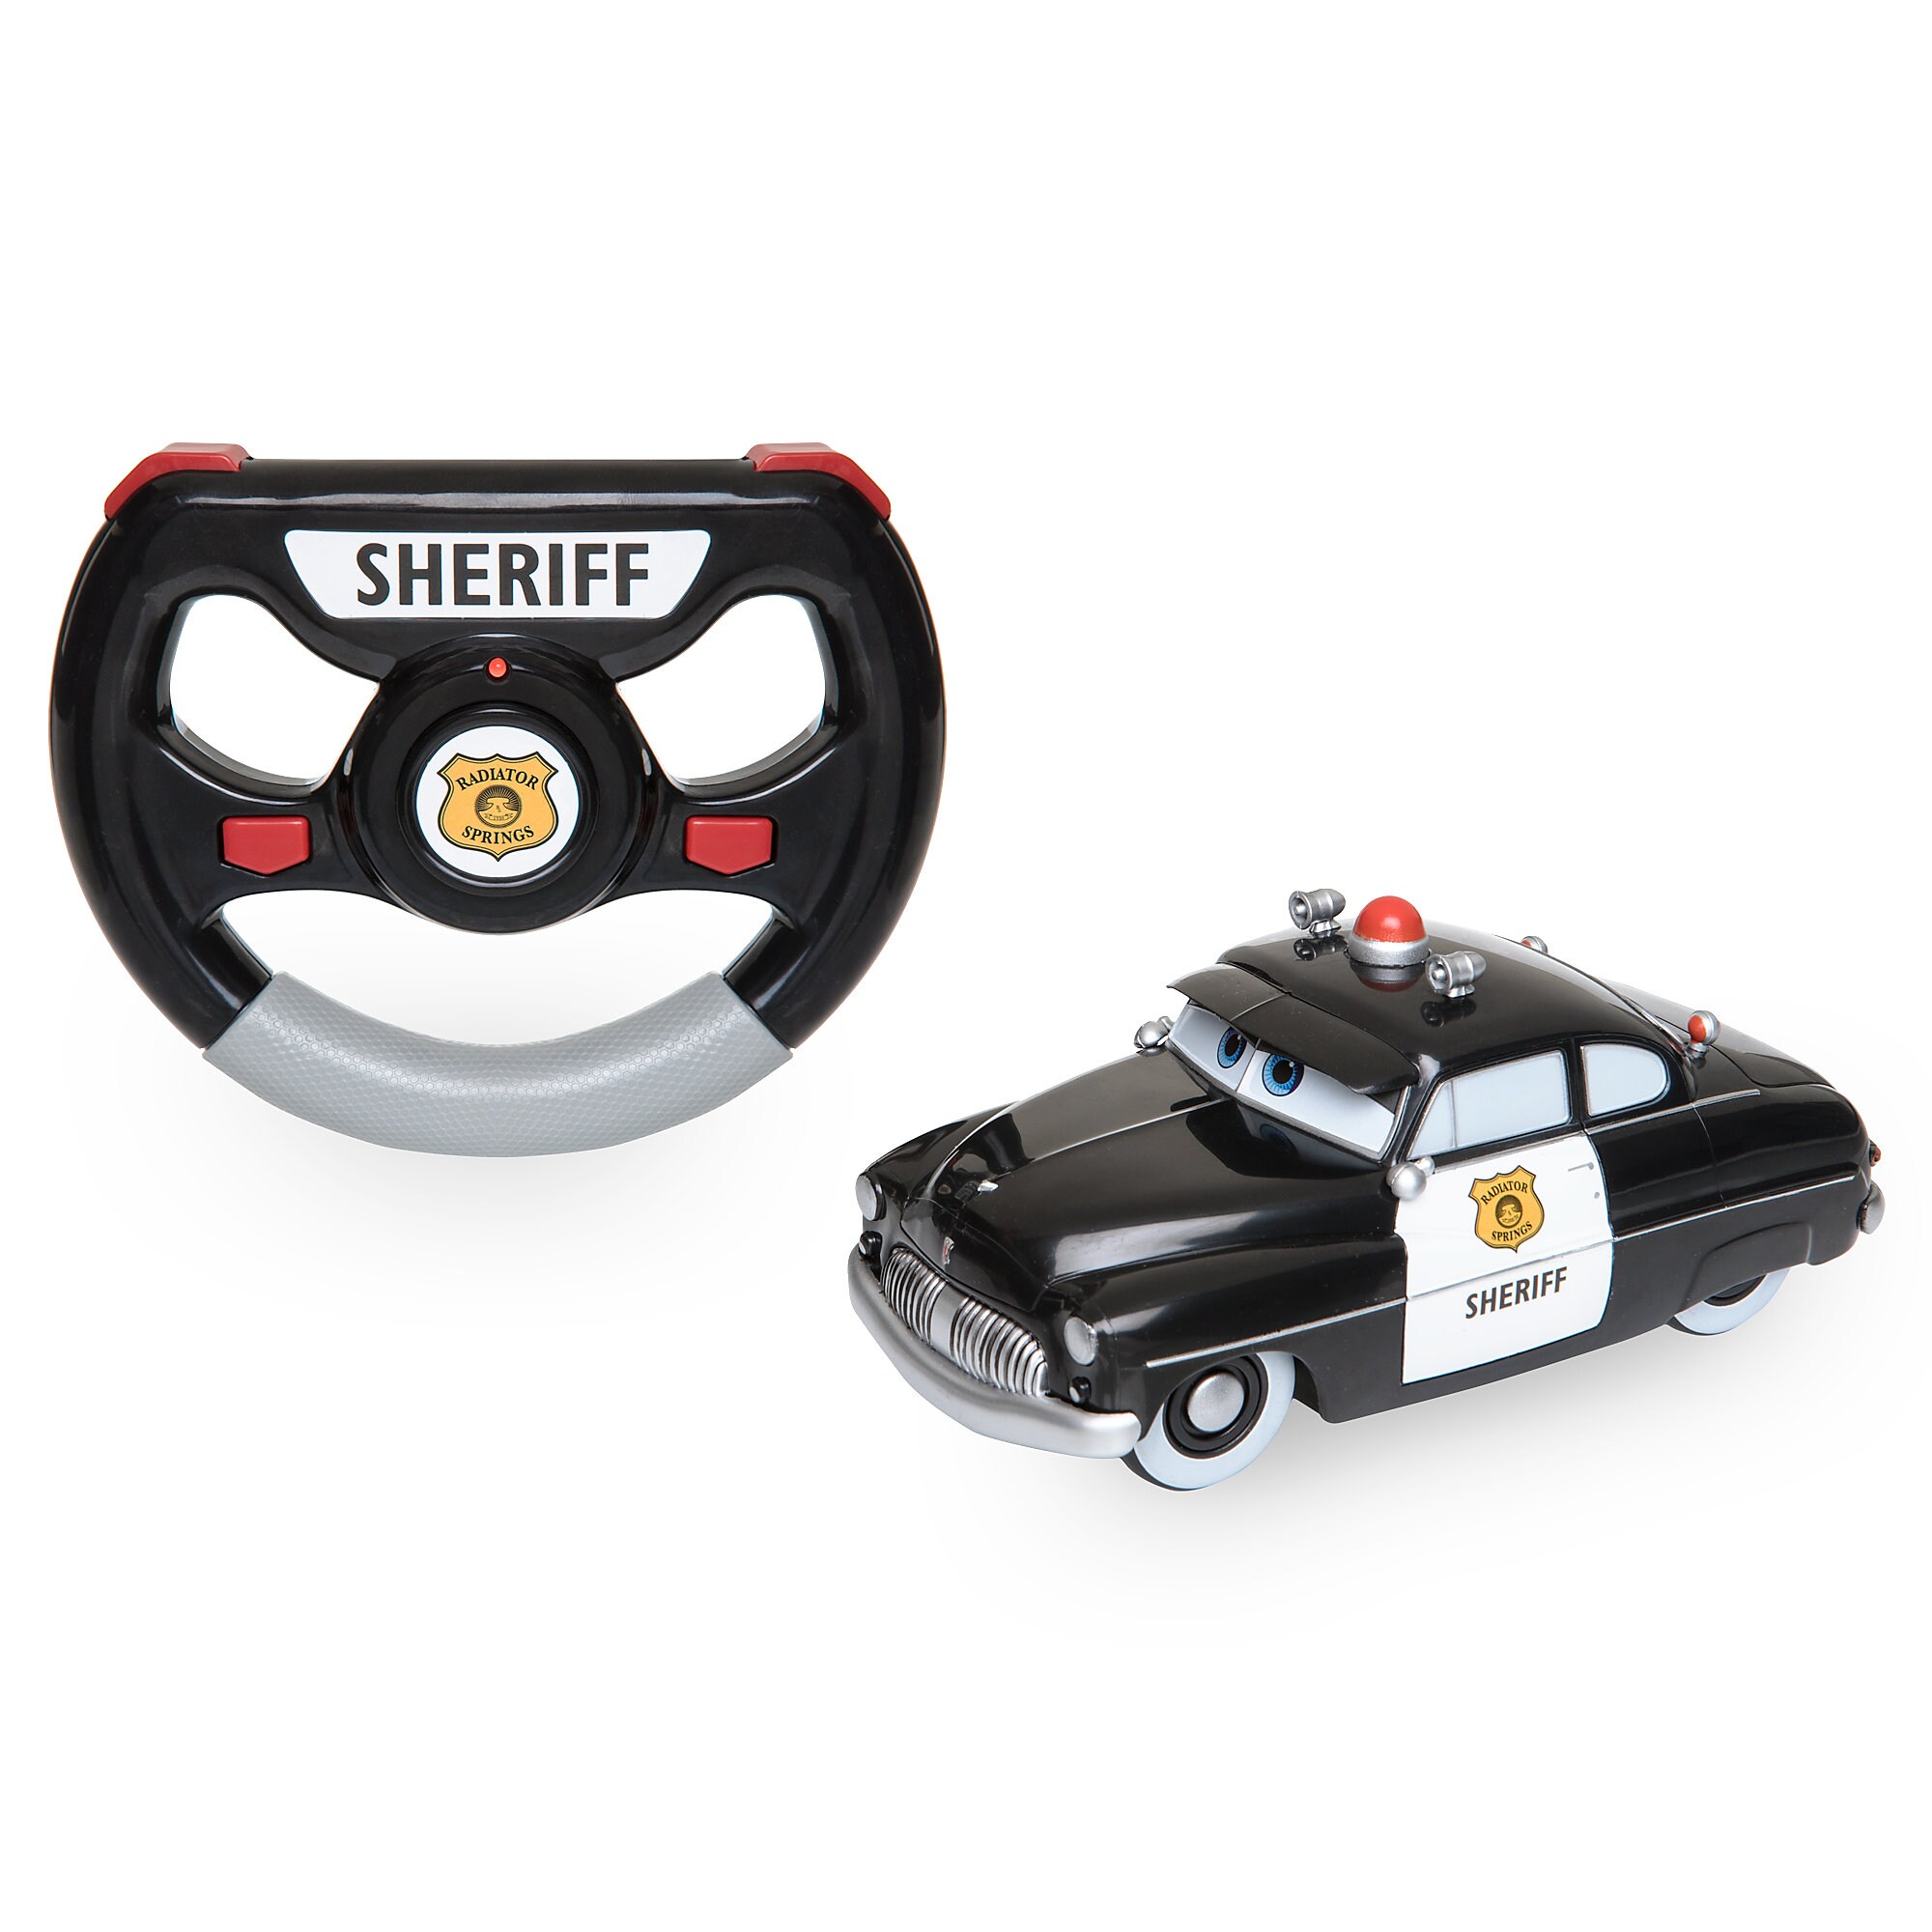 Sheriff Remote Control Vehicle - Cars